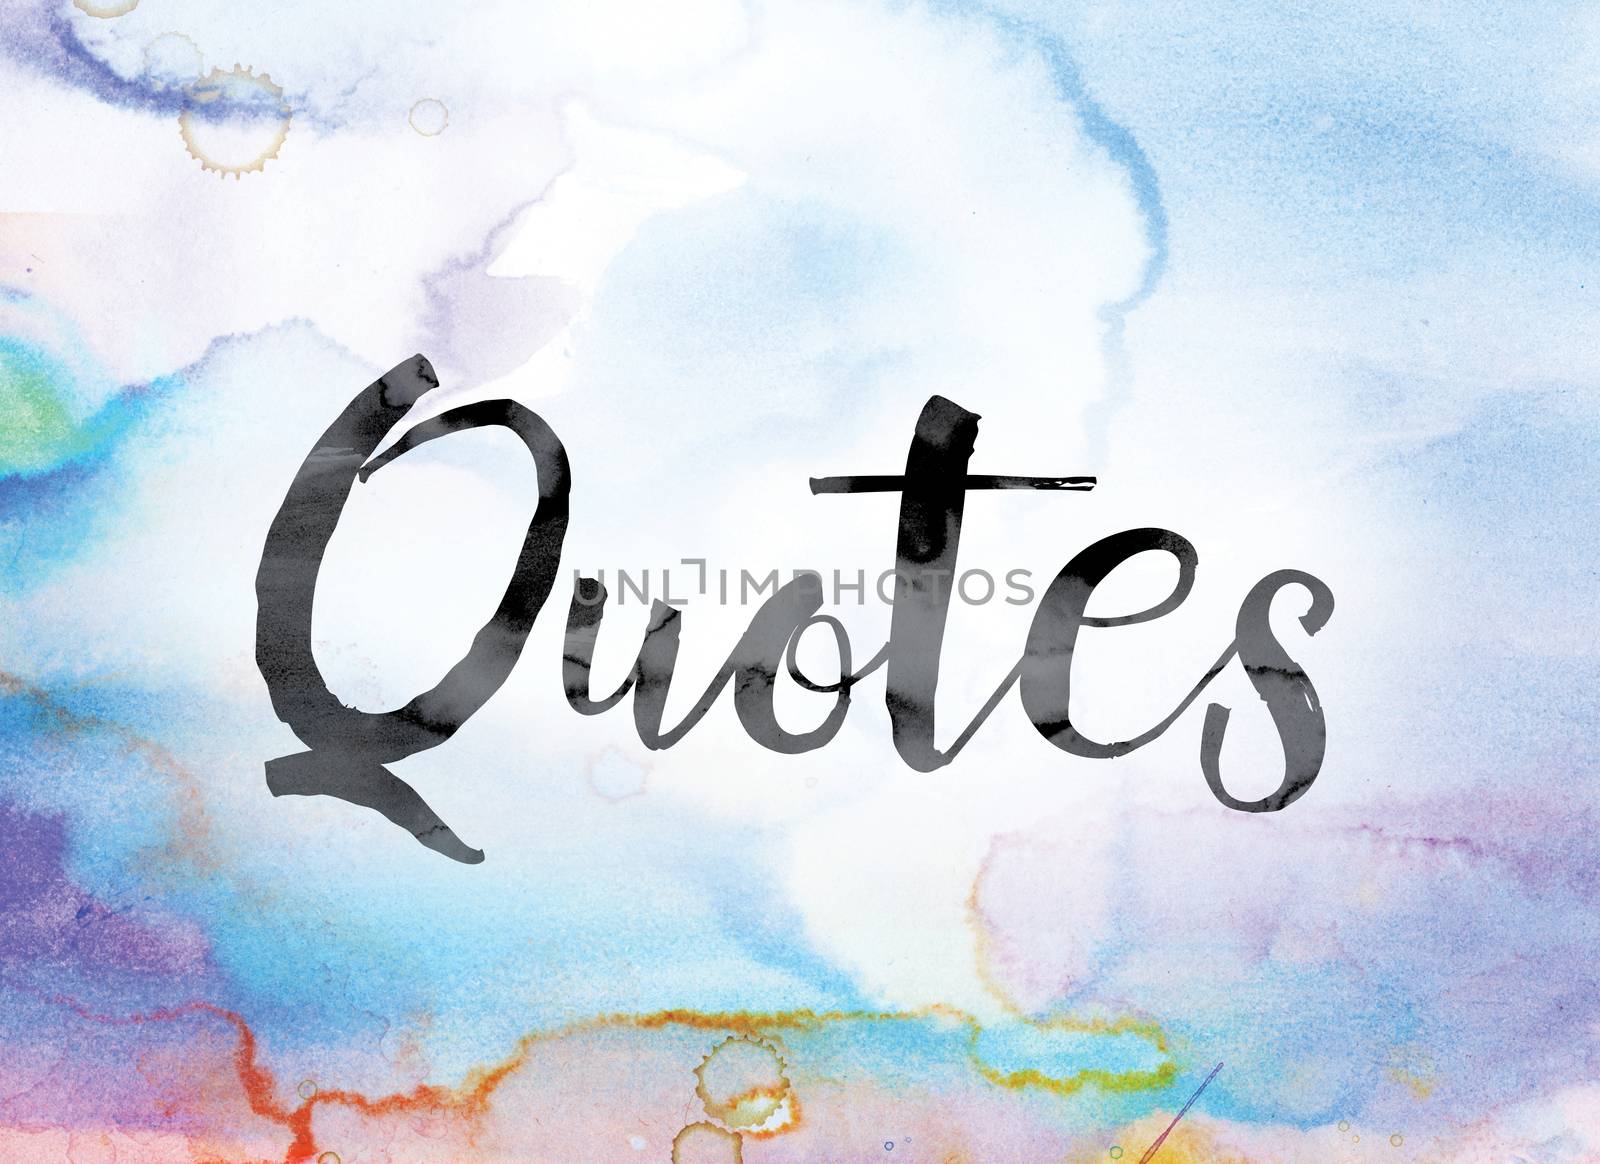 The word "Quotes" painted in black ink over a colorful watercolor washed background concept and theme.